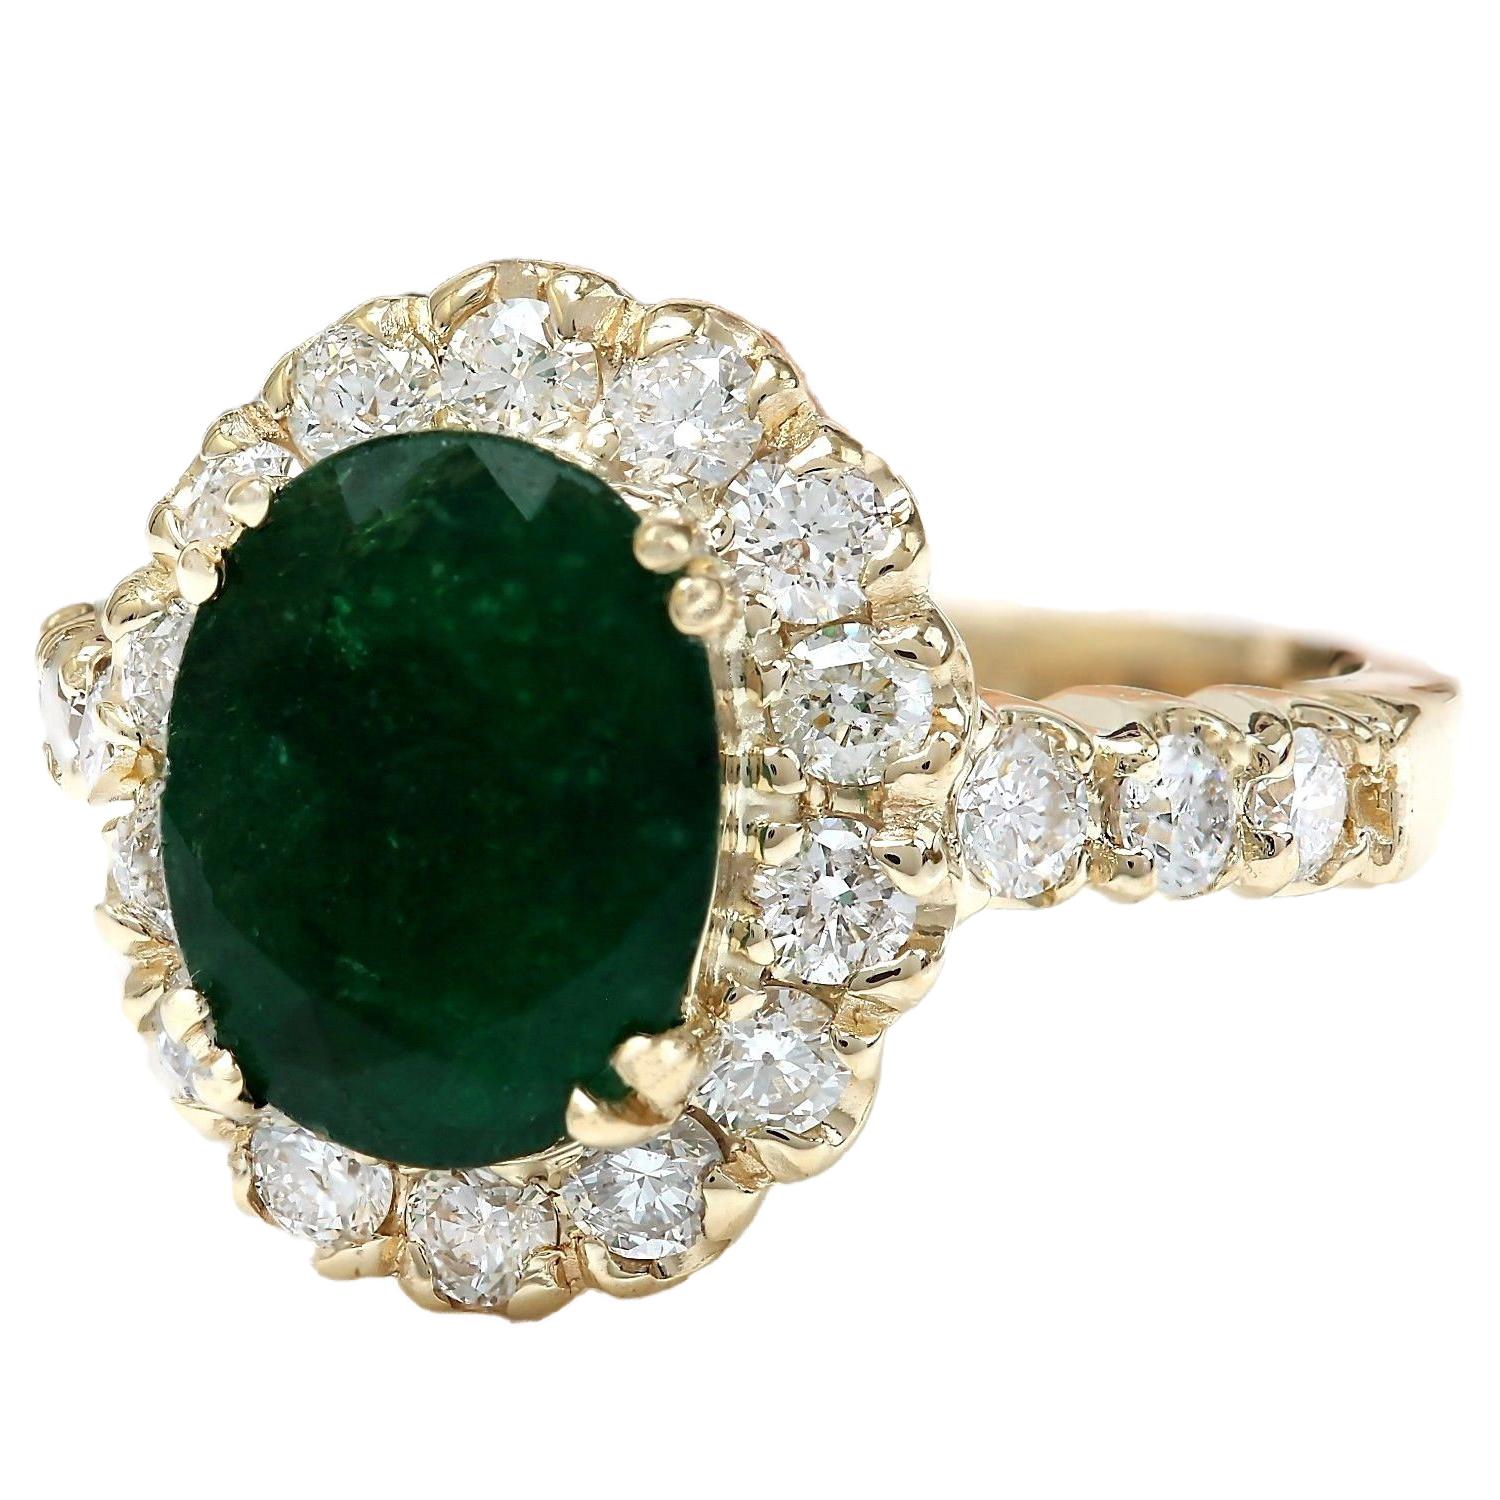 2.86 Carat Natural Emerald 14K Solid Yellow Gold Diamond Ring
 Item Type: Ring
 Item Style: Engagement
 Material: 14K Yellow Gold
 Mainstone: Emerald
 Stone Color: Green
 Stone Weight: 2.02 Carat
 Stone Shape: Oval
 Stone Quantity: 1
 Stone